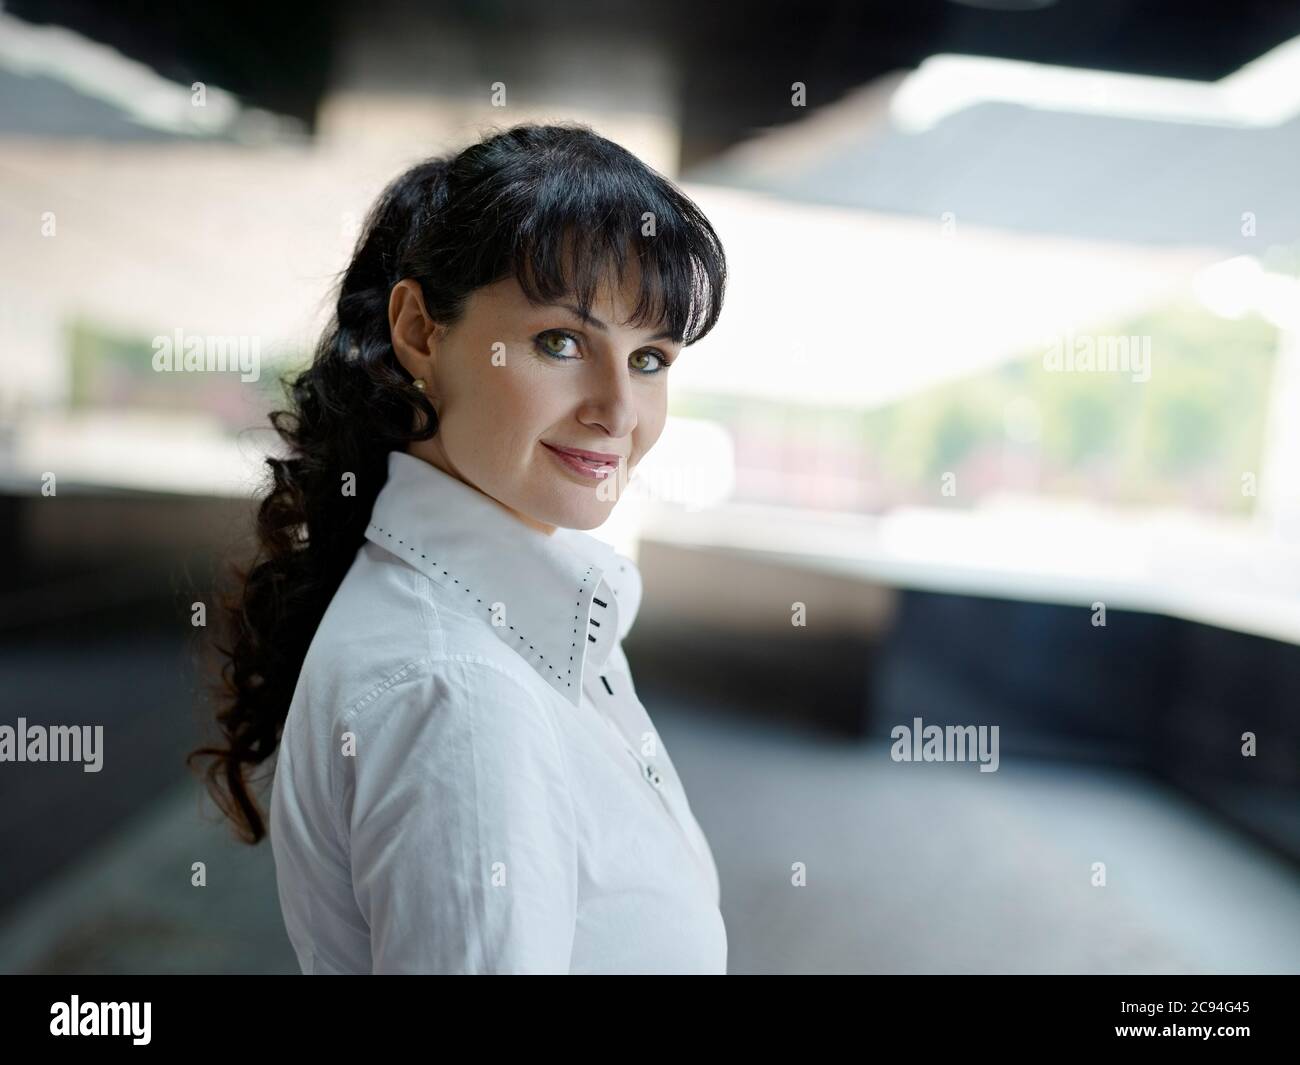 Mature Businesswoman Smiling And Looking At Camera Outdoors Stock Photo